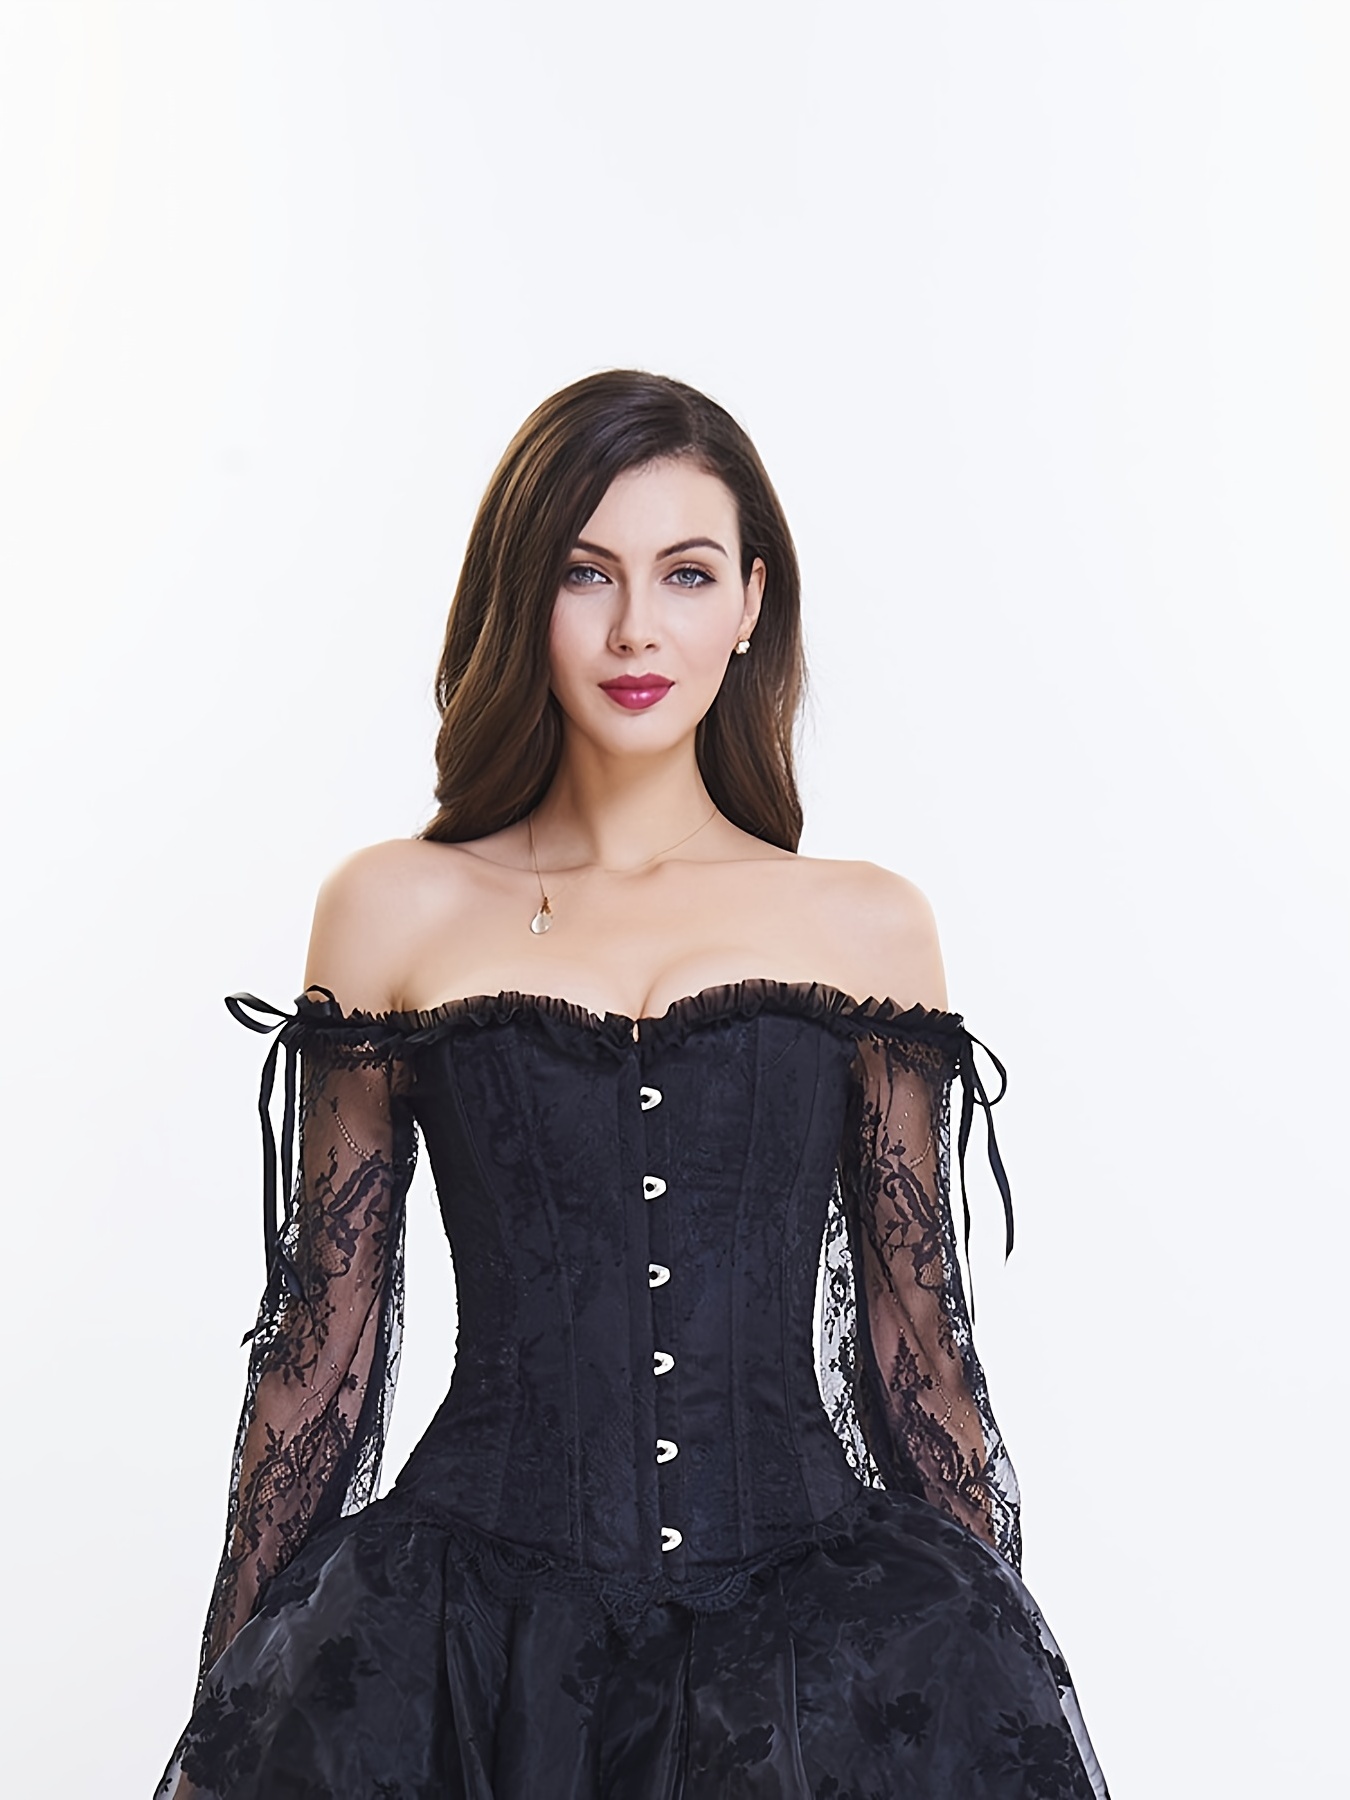 Sexy Gothic Lace Fuller Bust Corset Dress 2017 Black Lingerie For